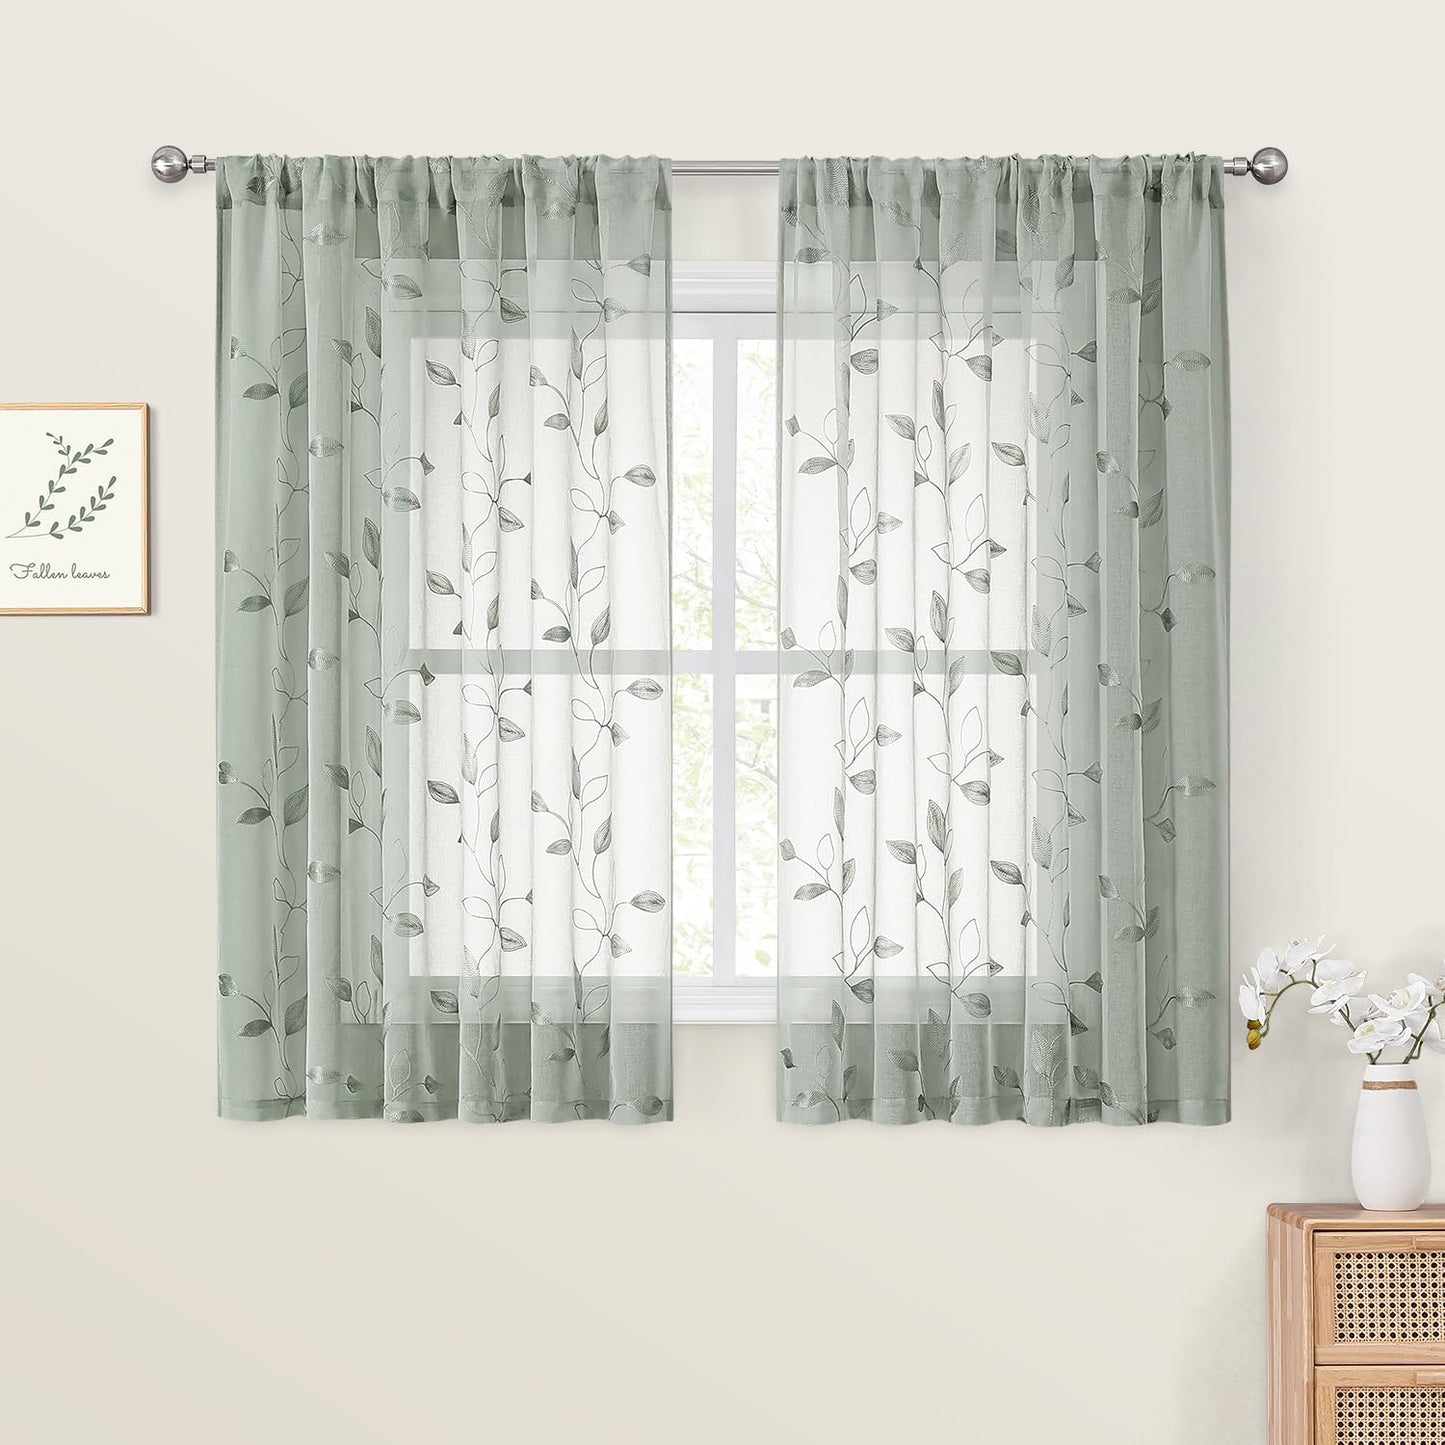 HOMEIDEAS Sage Green Sheer Curtains 52 X 63 Inches Length 2 Panels Embroidered Leaf Pattern Pocket Faux Linen Floral Semi Sheer Voile Window Curtains/Drapes for Bedroom Living Room  HOMEIDEAS 1-Sage Green W52" X L54" 